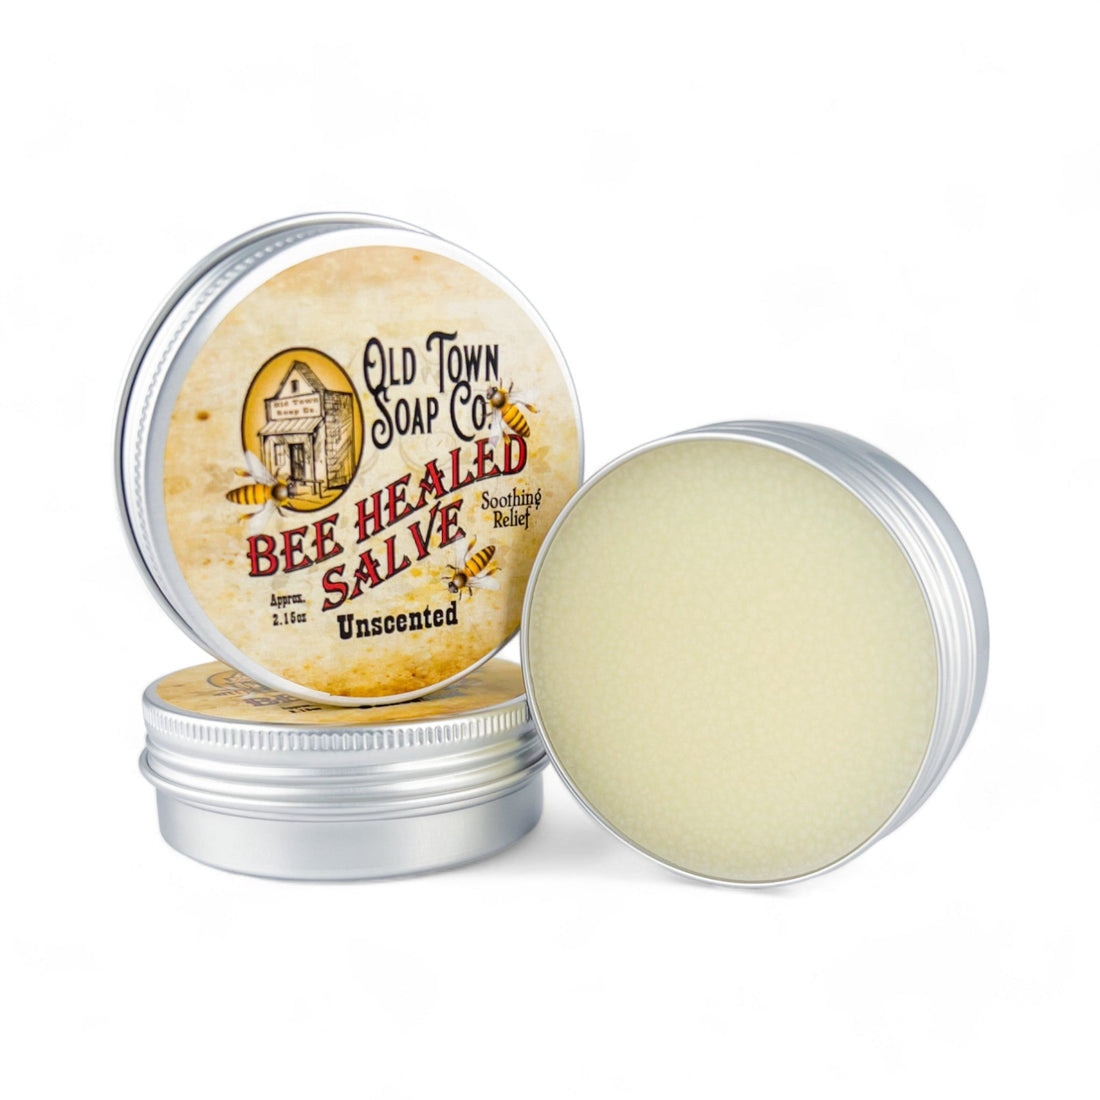 Unscented Bee Healed Salve - Old Town Soap Co.